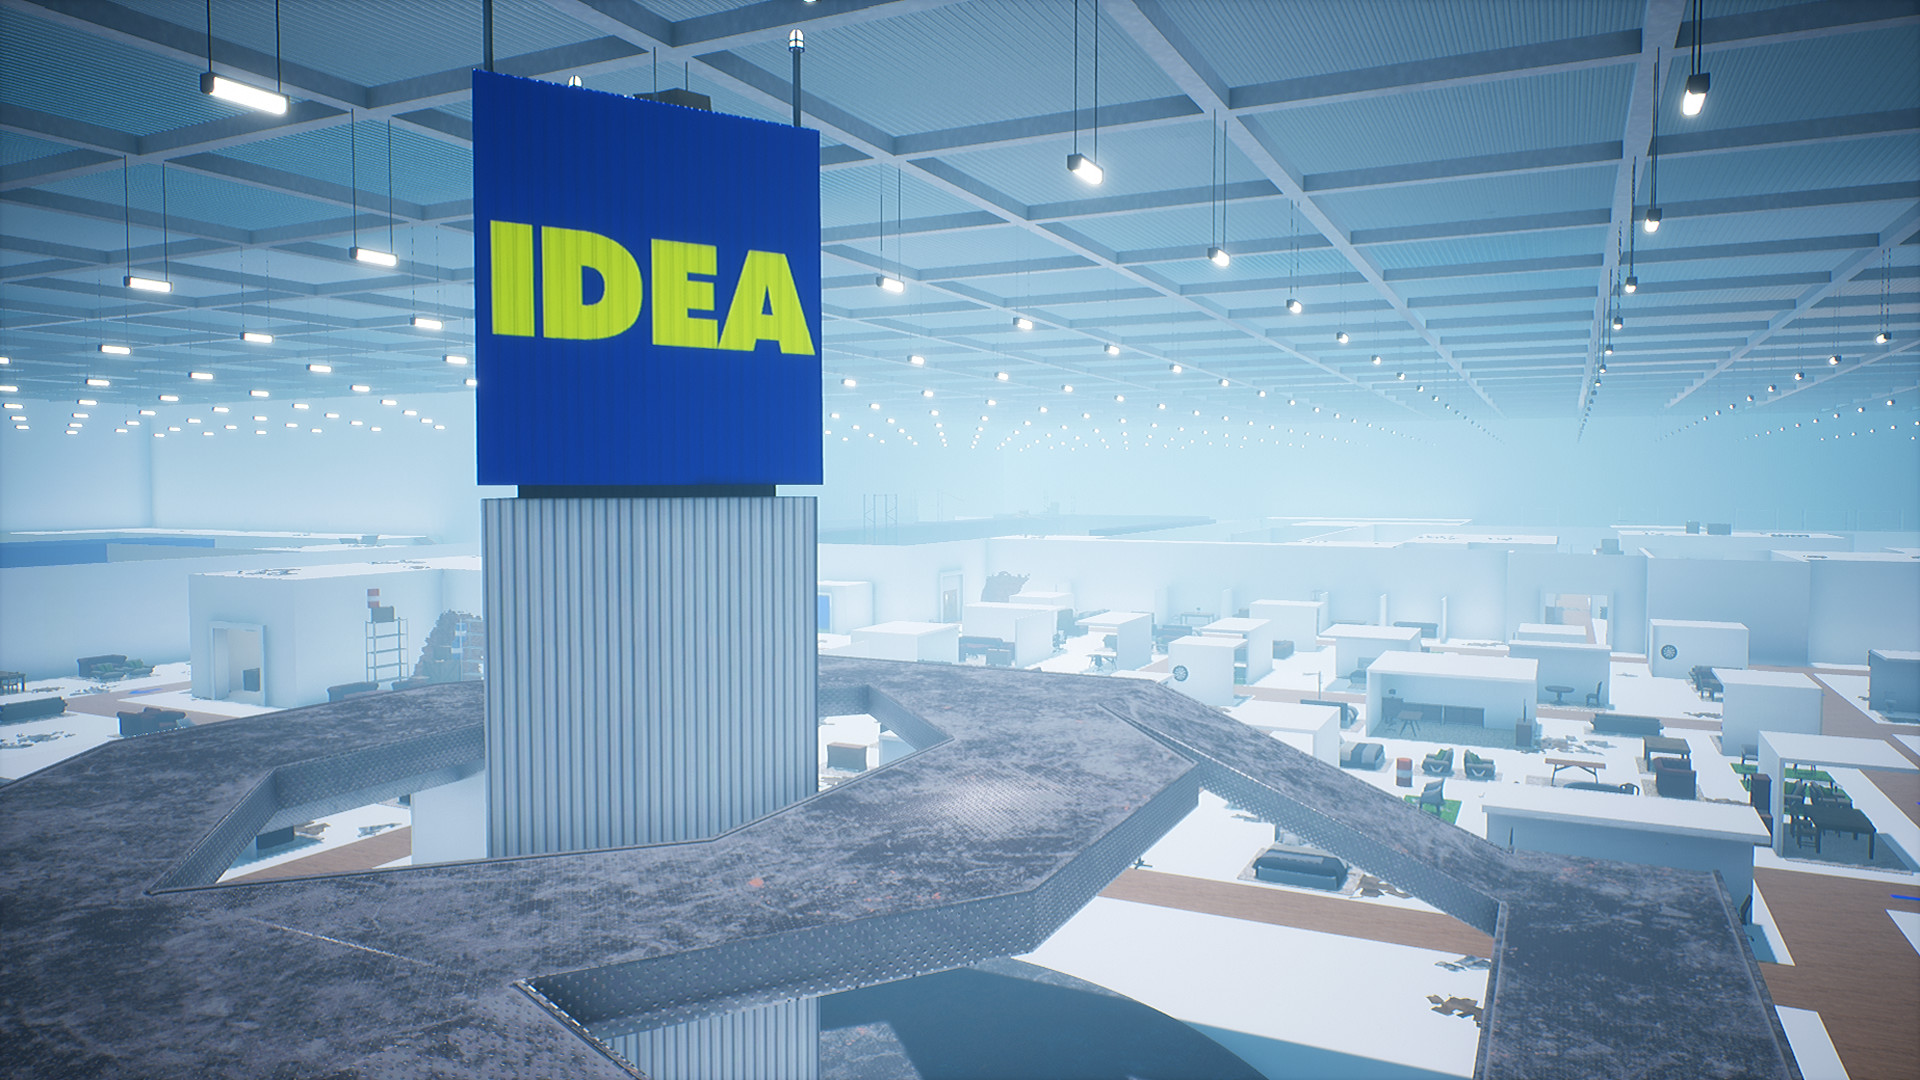 Wait, there are two different games about causing large-scale mayhem in a pretend Ikea?